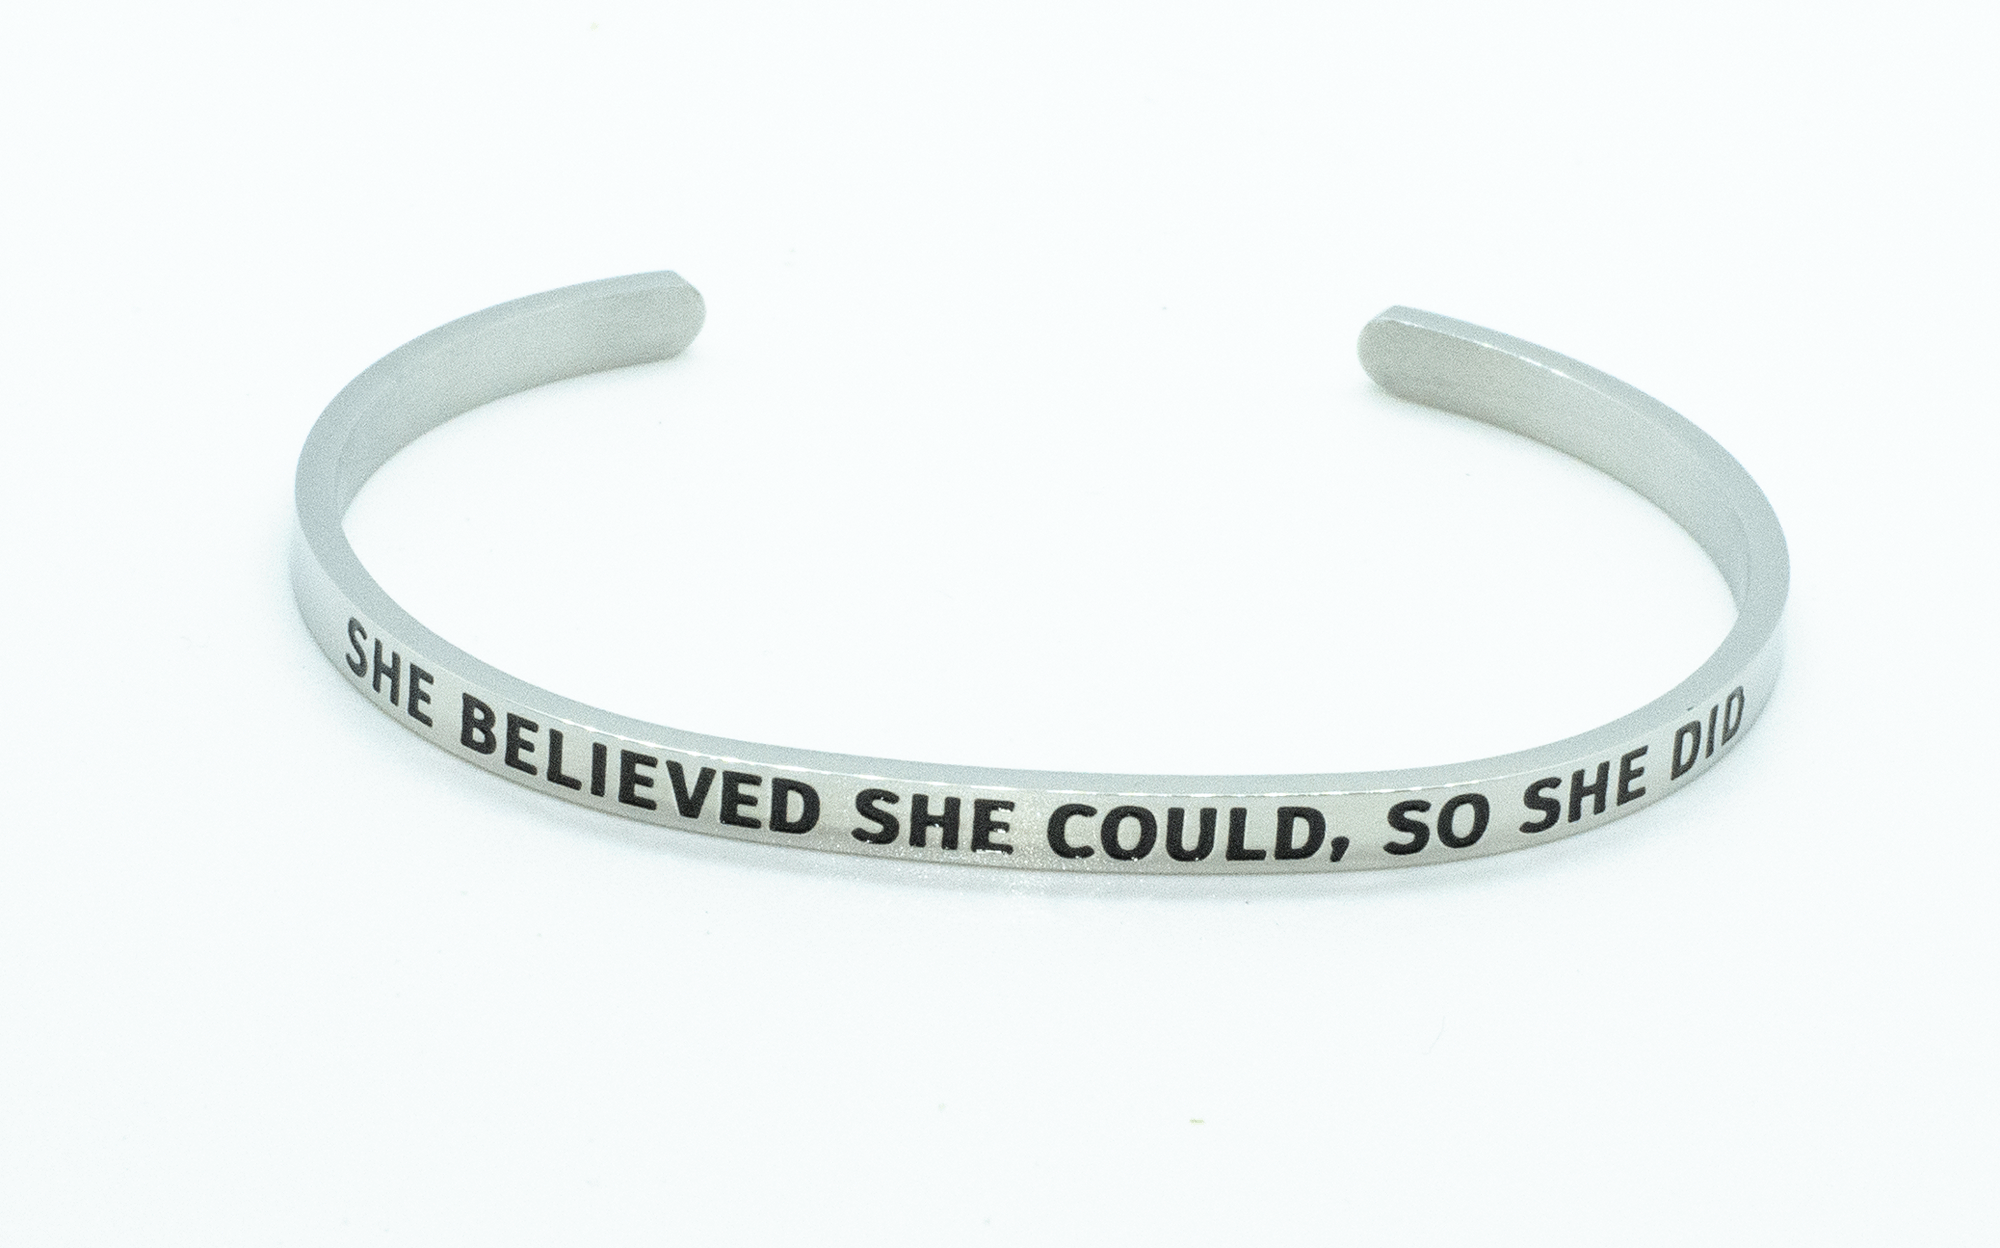 She Believed She Could - Stainless Steel Affirmation Bracelet